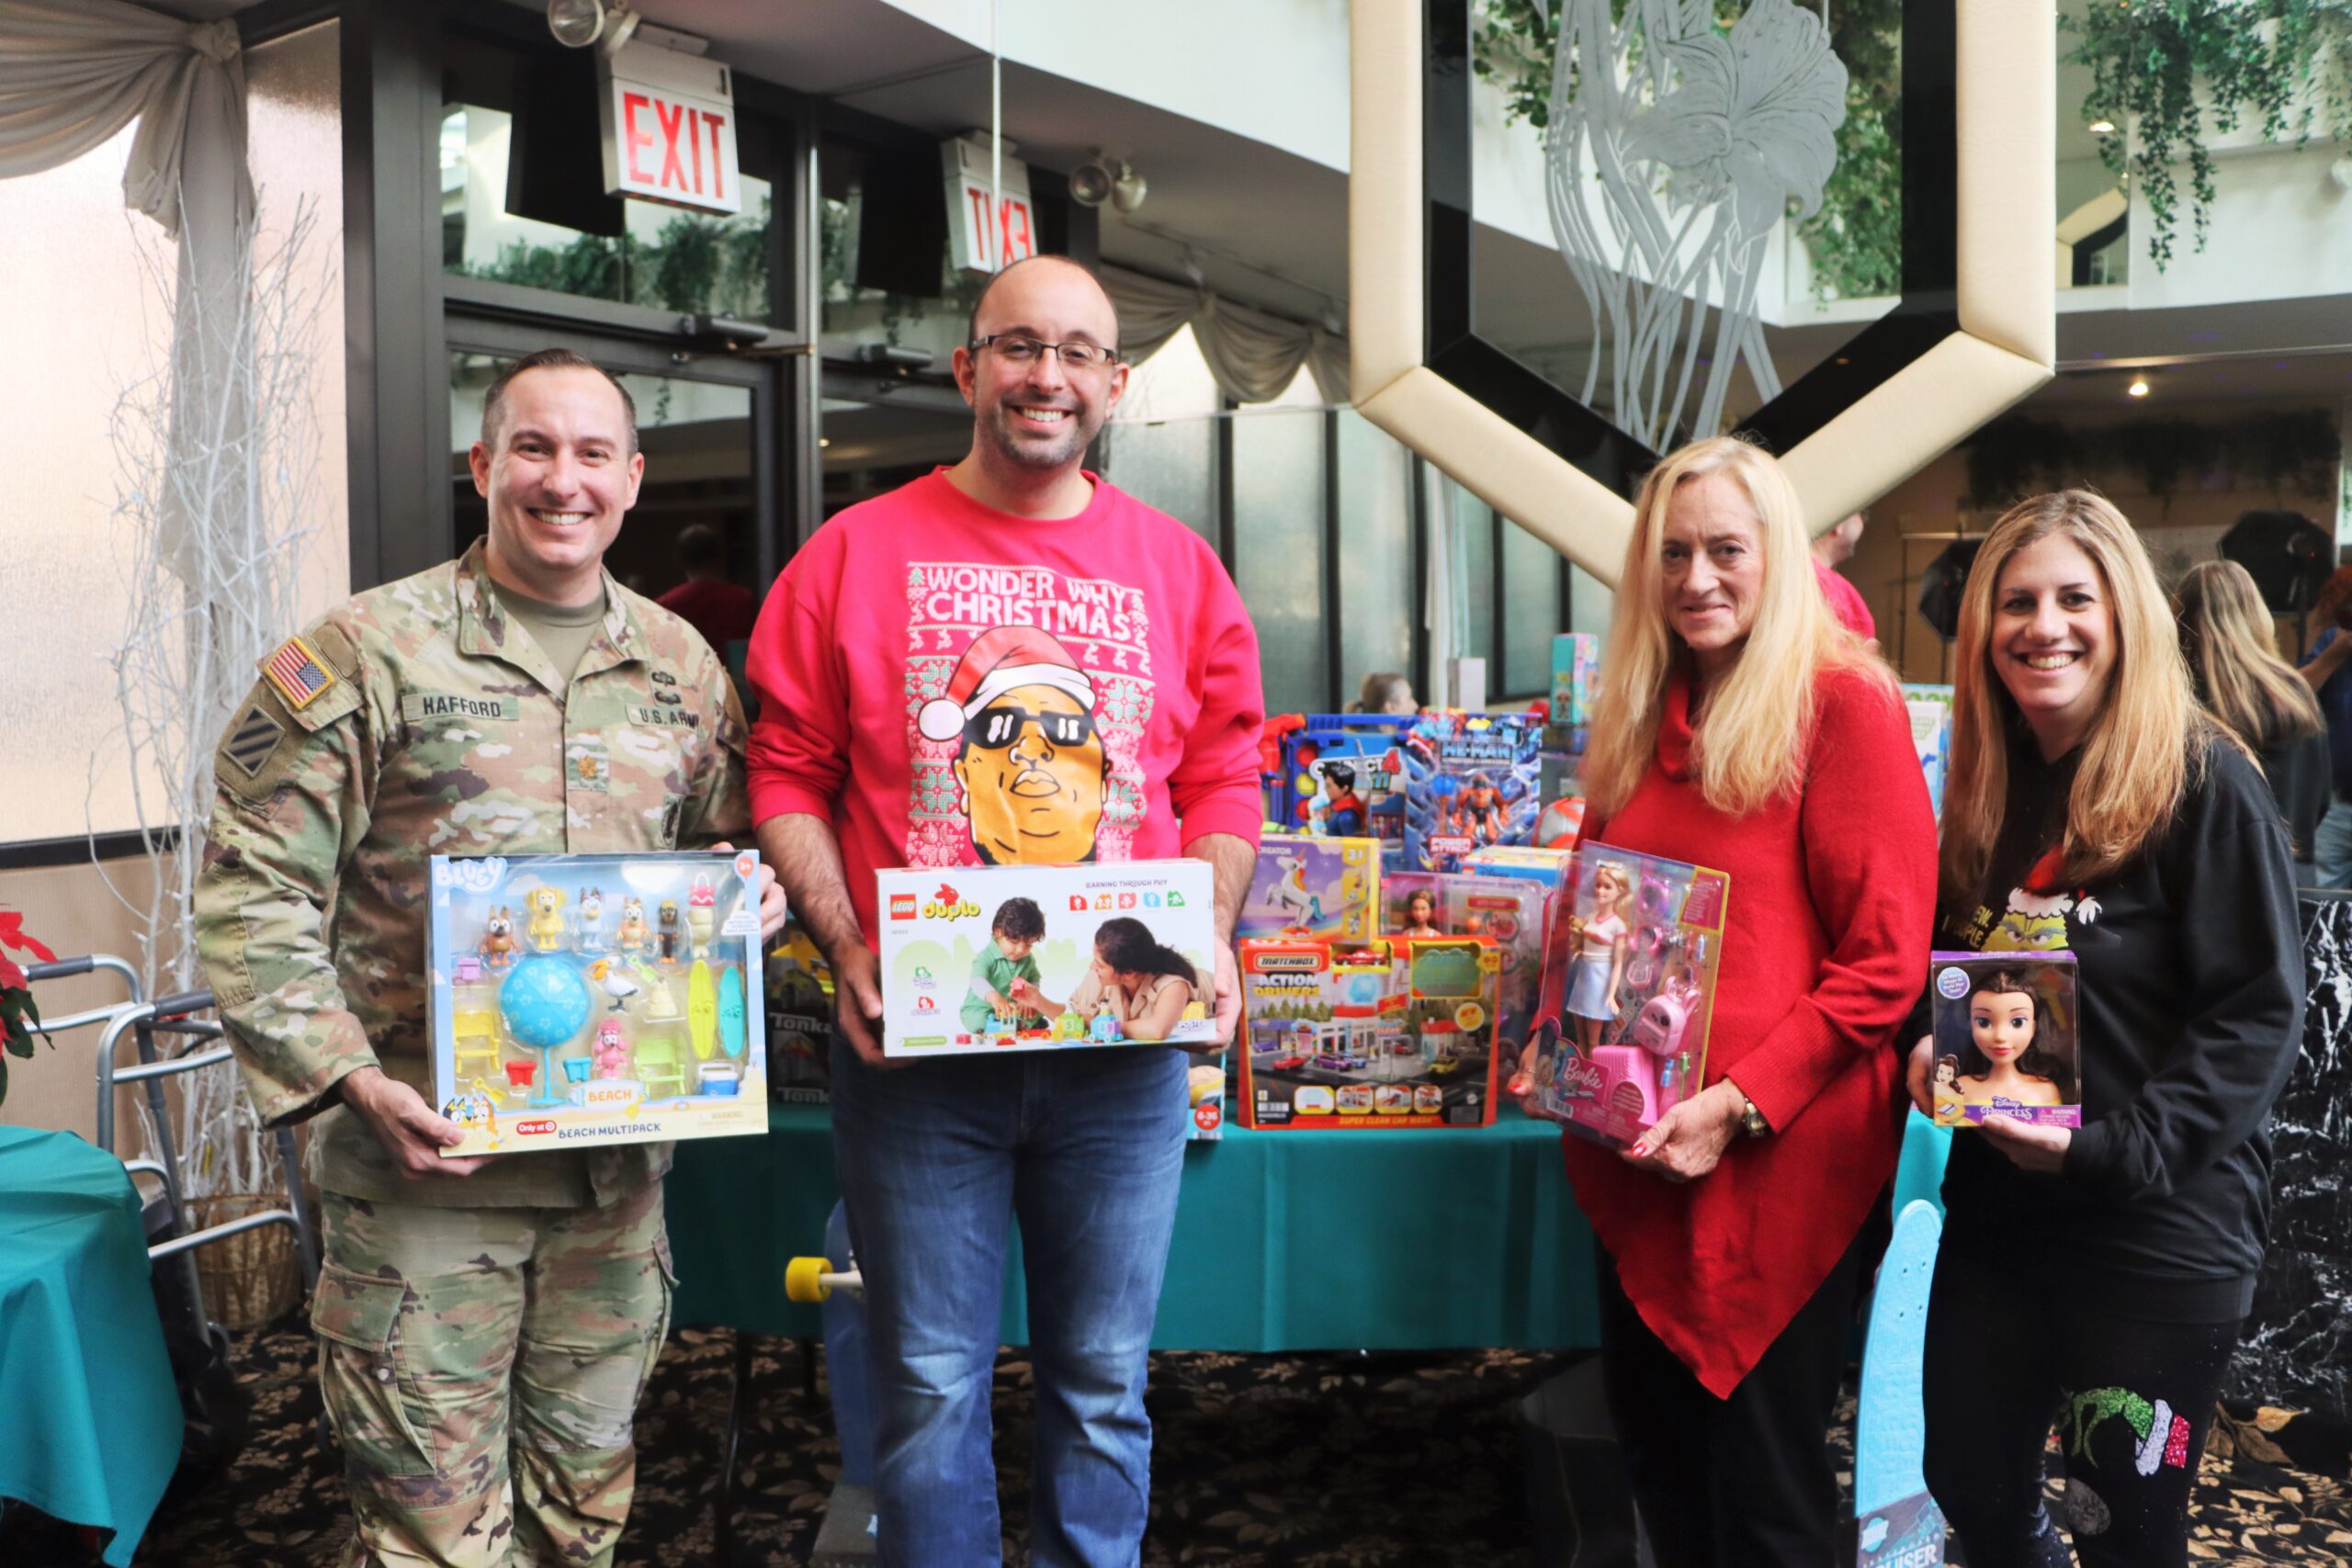 U.S. Army Maj. Roger Hafford, BRLA President Adam Kalish, Margaret Stanton, and Joann Monaco at the Breakfast with Santa event, showcasing the community's support for military families.Photos: Mario Belluomo/Brooklyn Eagle